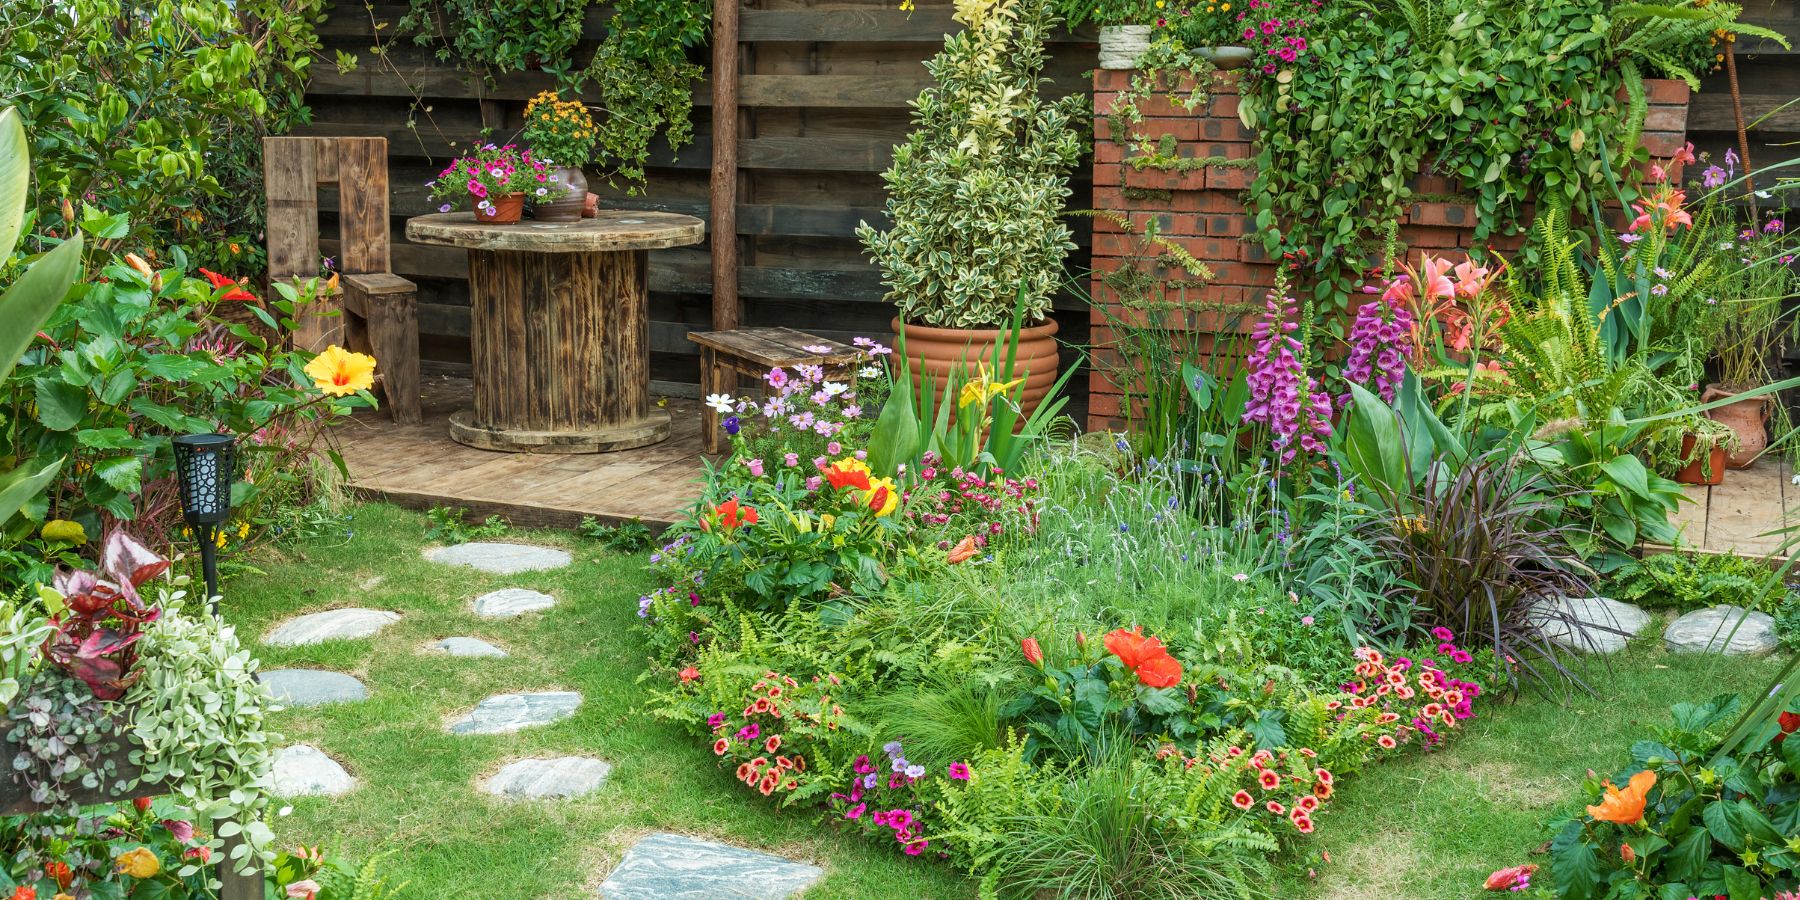 What Are the Best Water-Saving Practices for a Lush Garden?